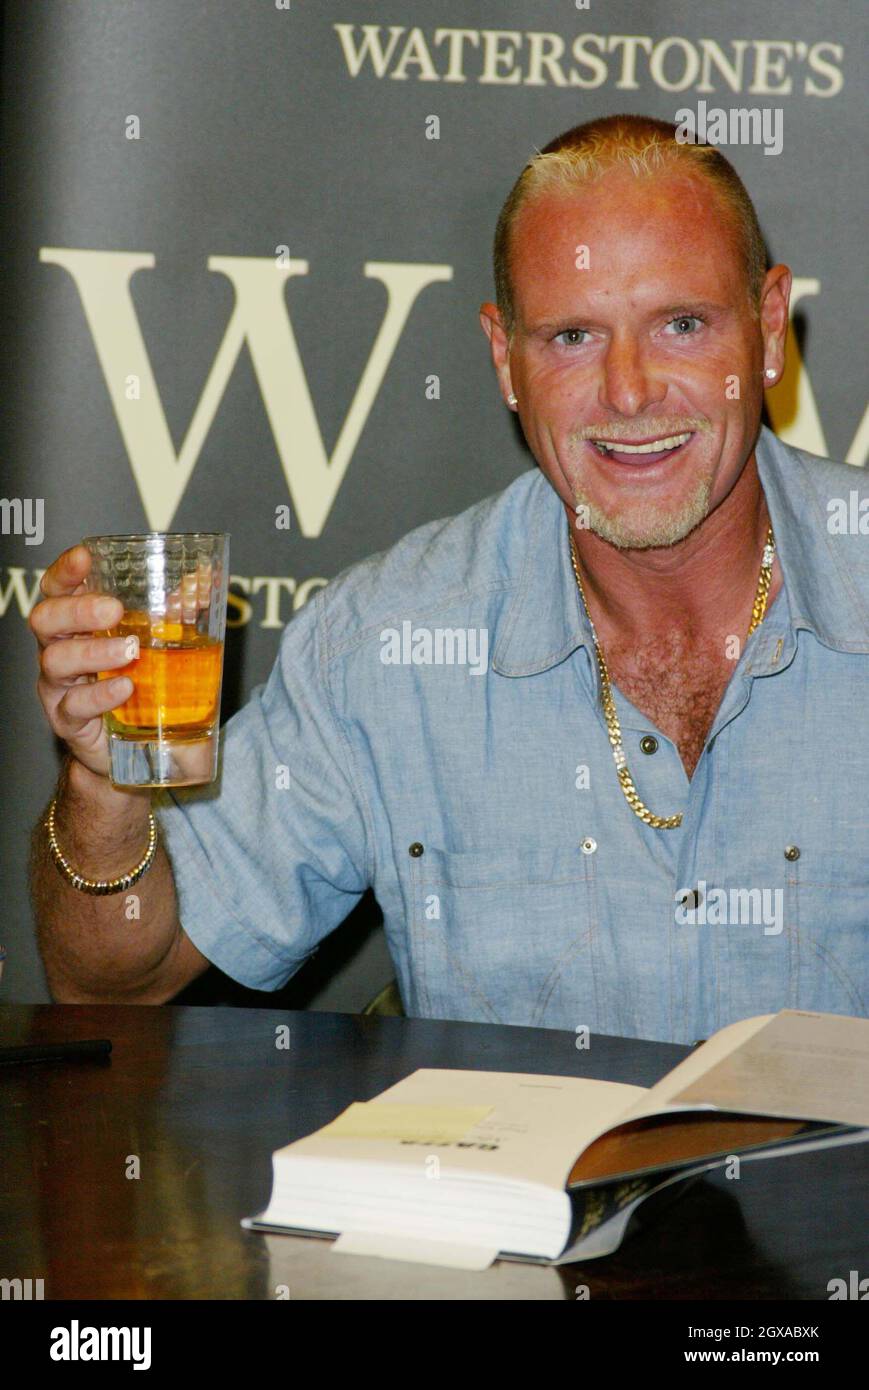 Paul Gascoigne at Waterstone's in Leadenhall Market, London, where the footballer signed copies of his autobiography, Gazza: My Story. Stock Photo